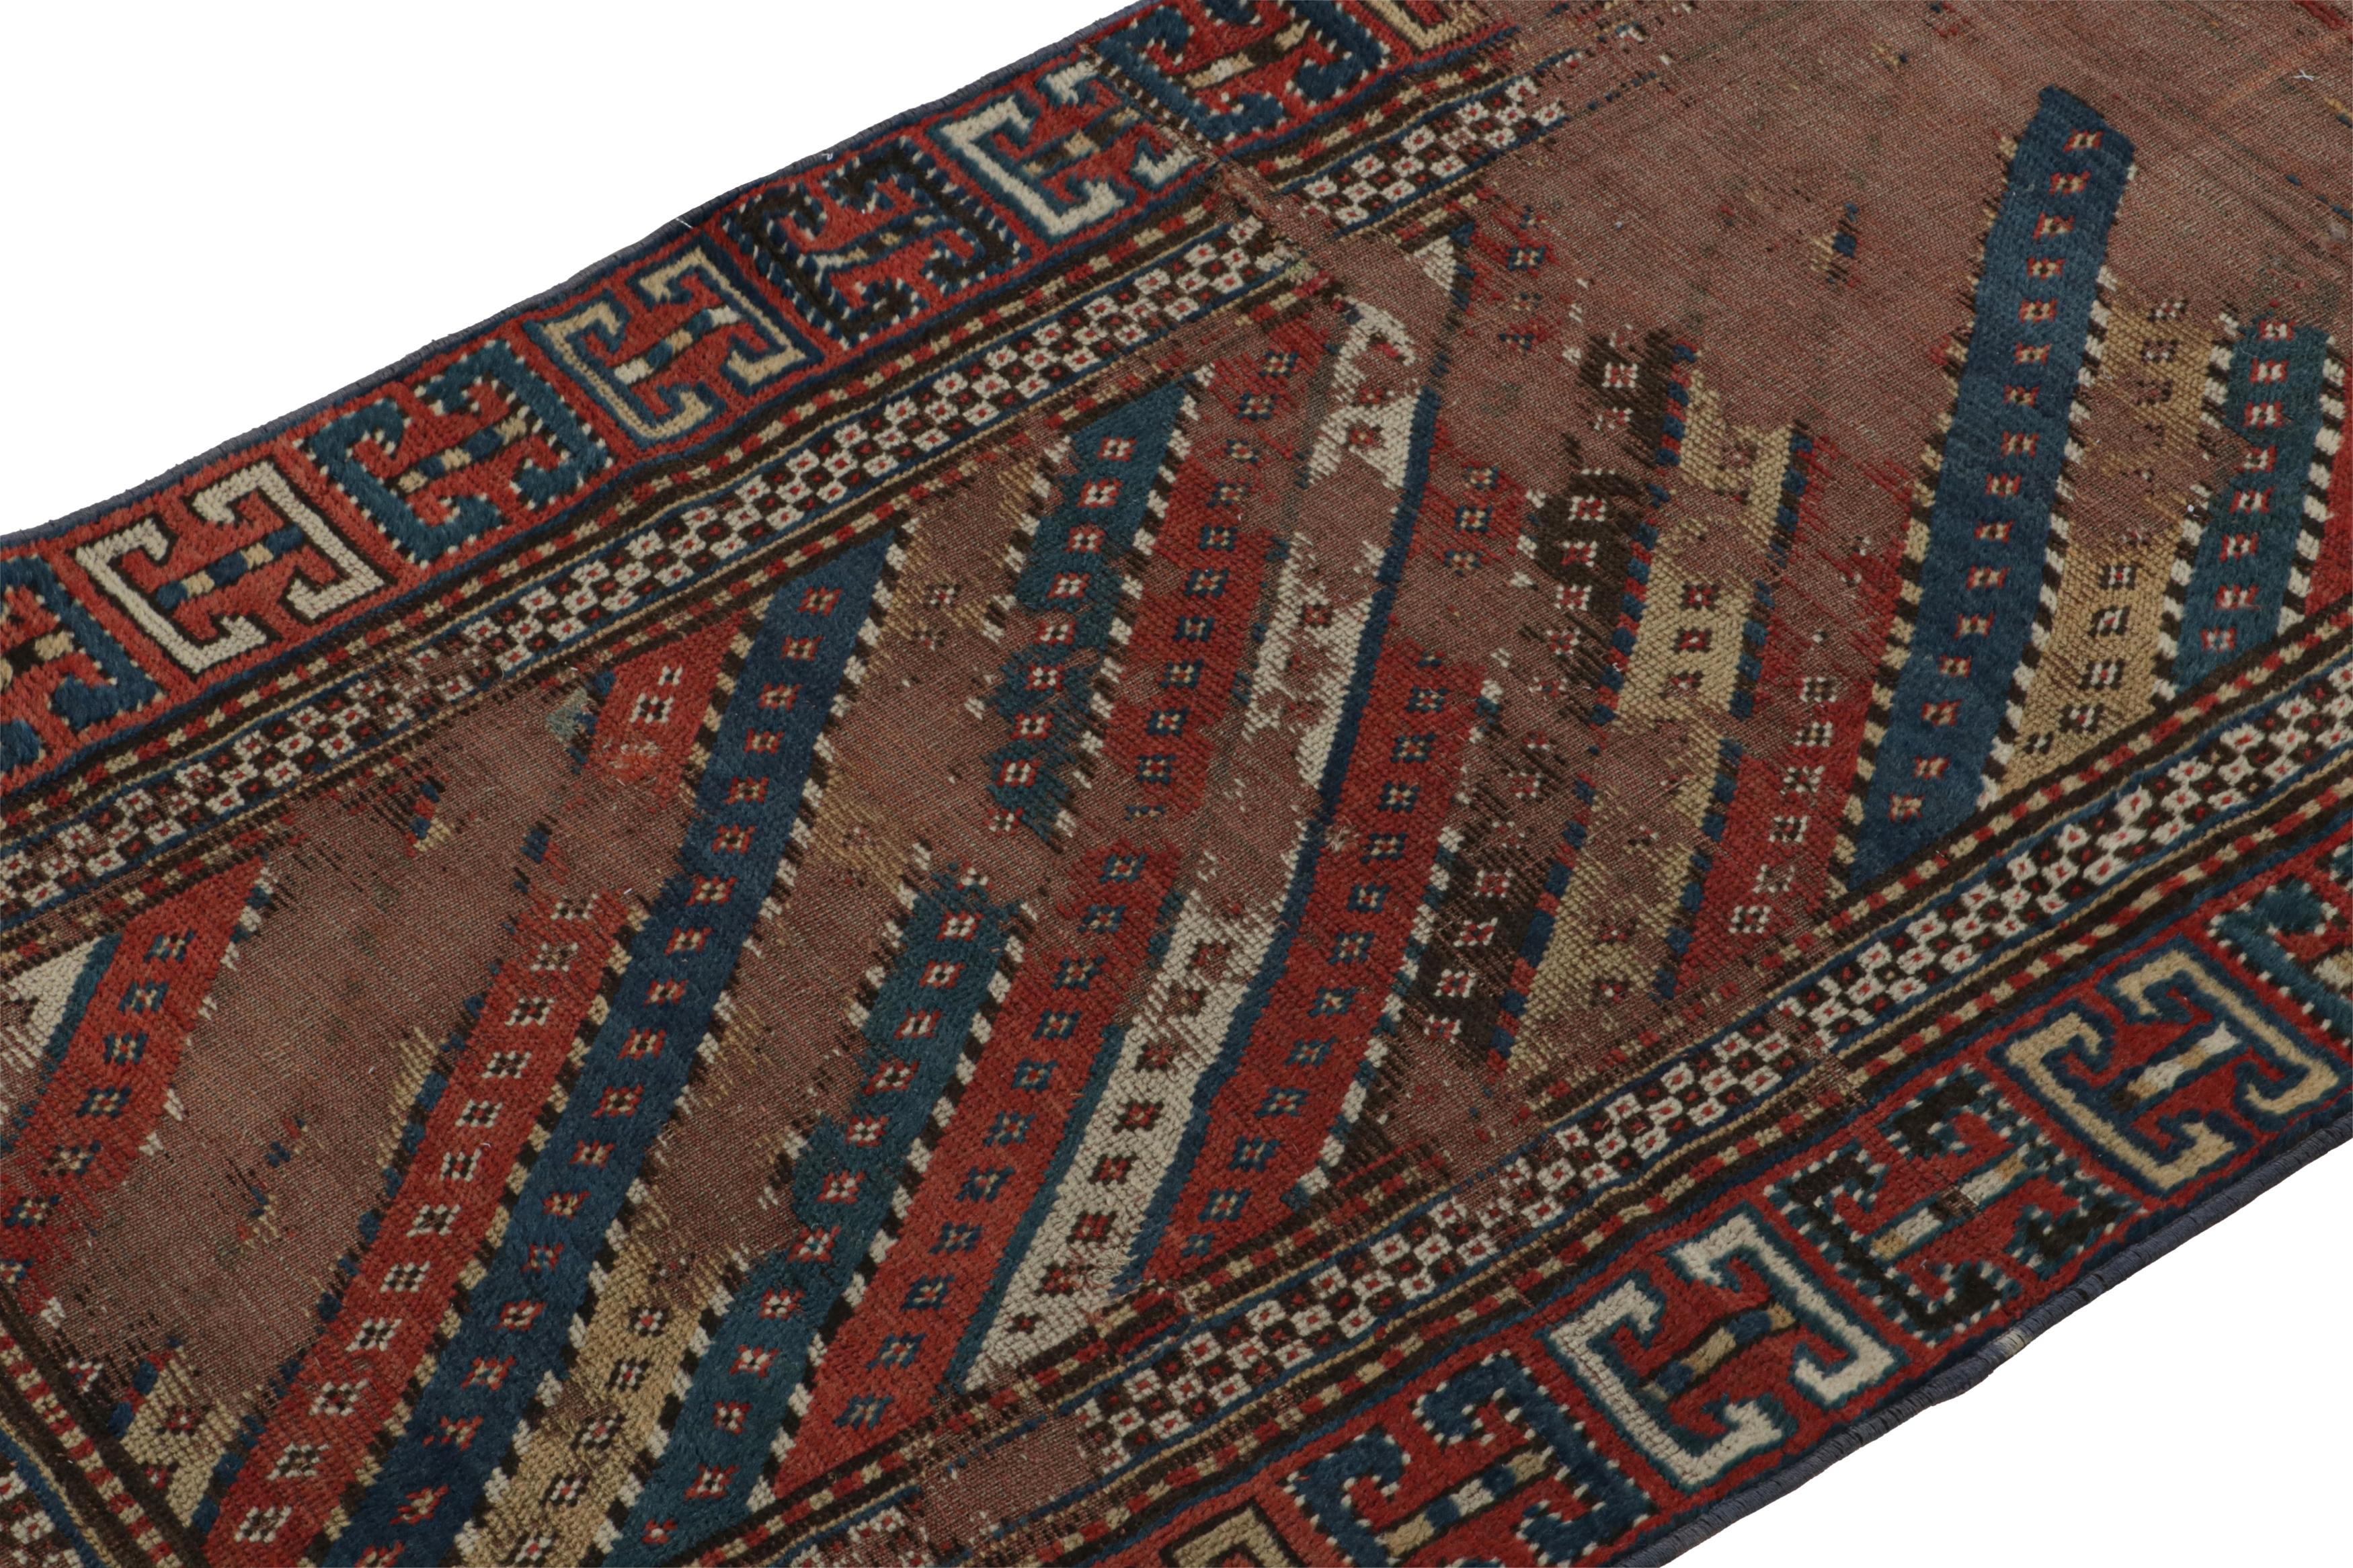 Russian Antique Kazak Runner Rug with Red & Blue Geometric Patterns, from Rug & Kilim For Sale